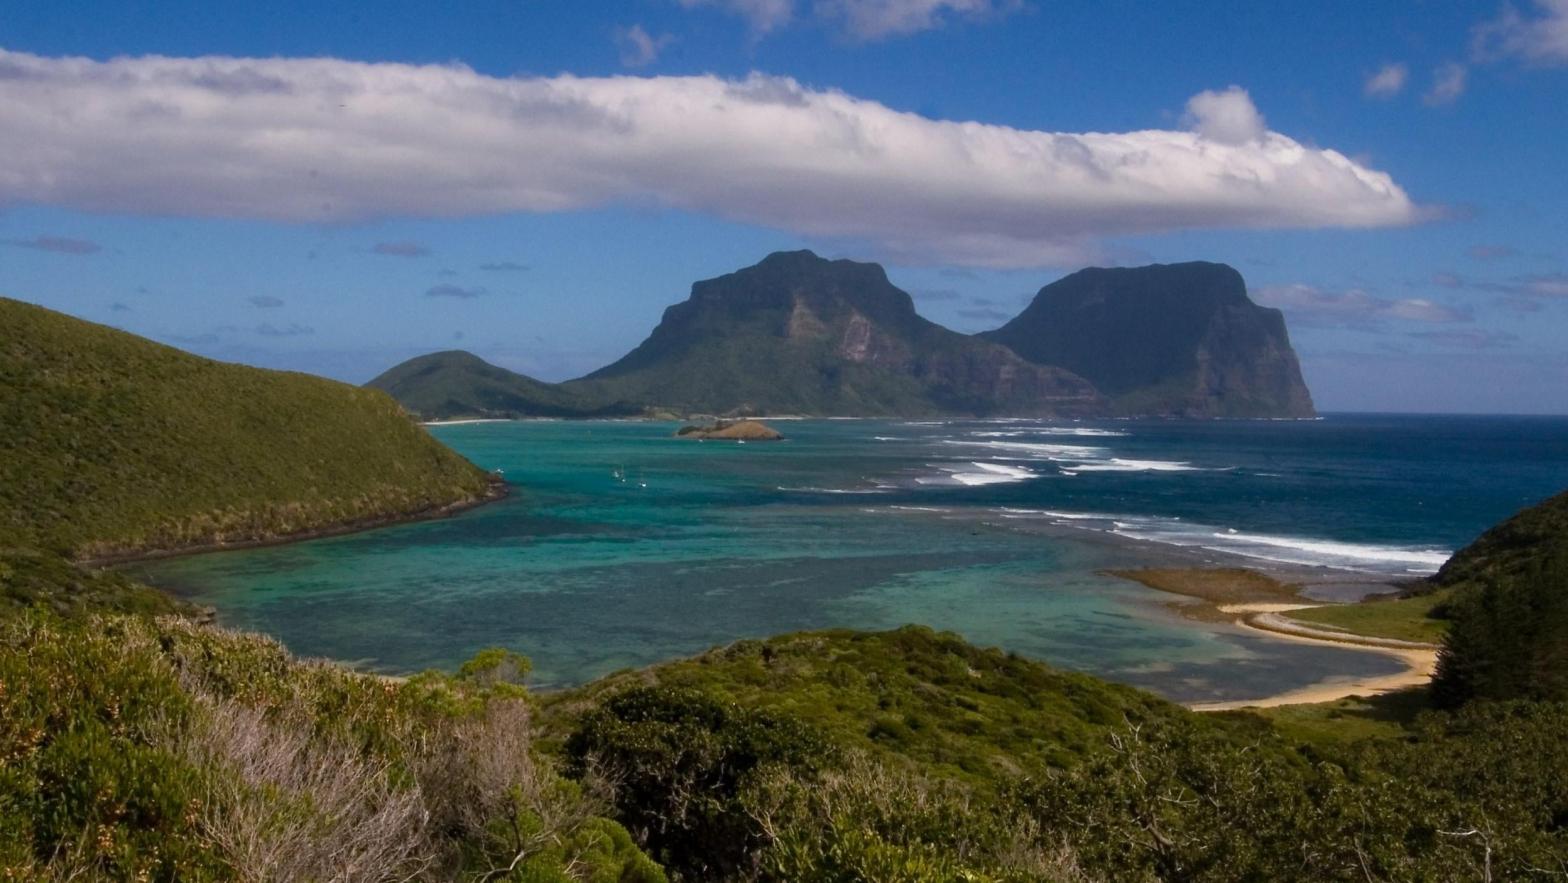 A view of Mount Lidgbird and Mount Gower on Lord Howe Island.  (Image: Fanny Schertzer, Fair Use)